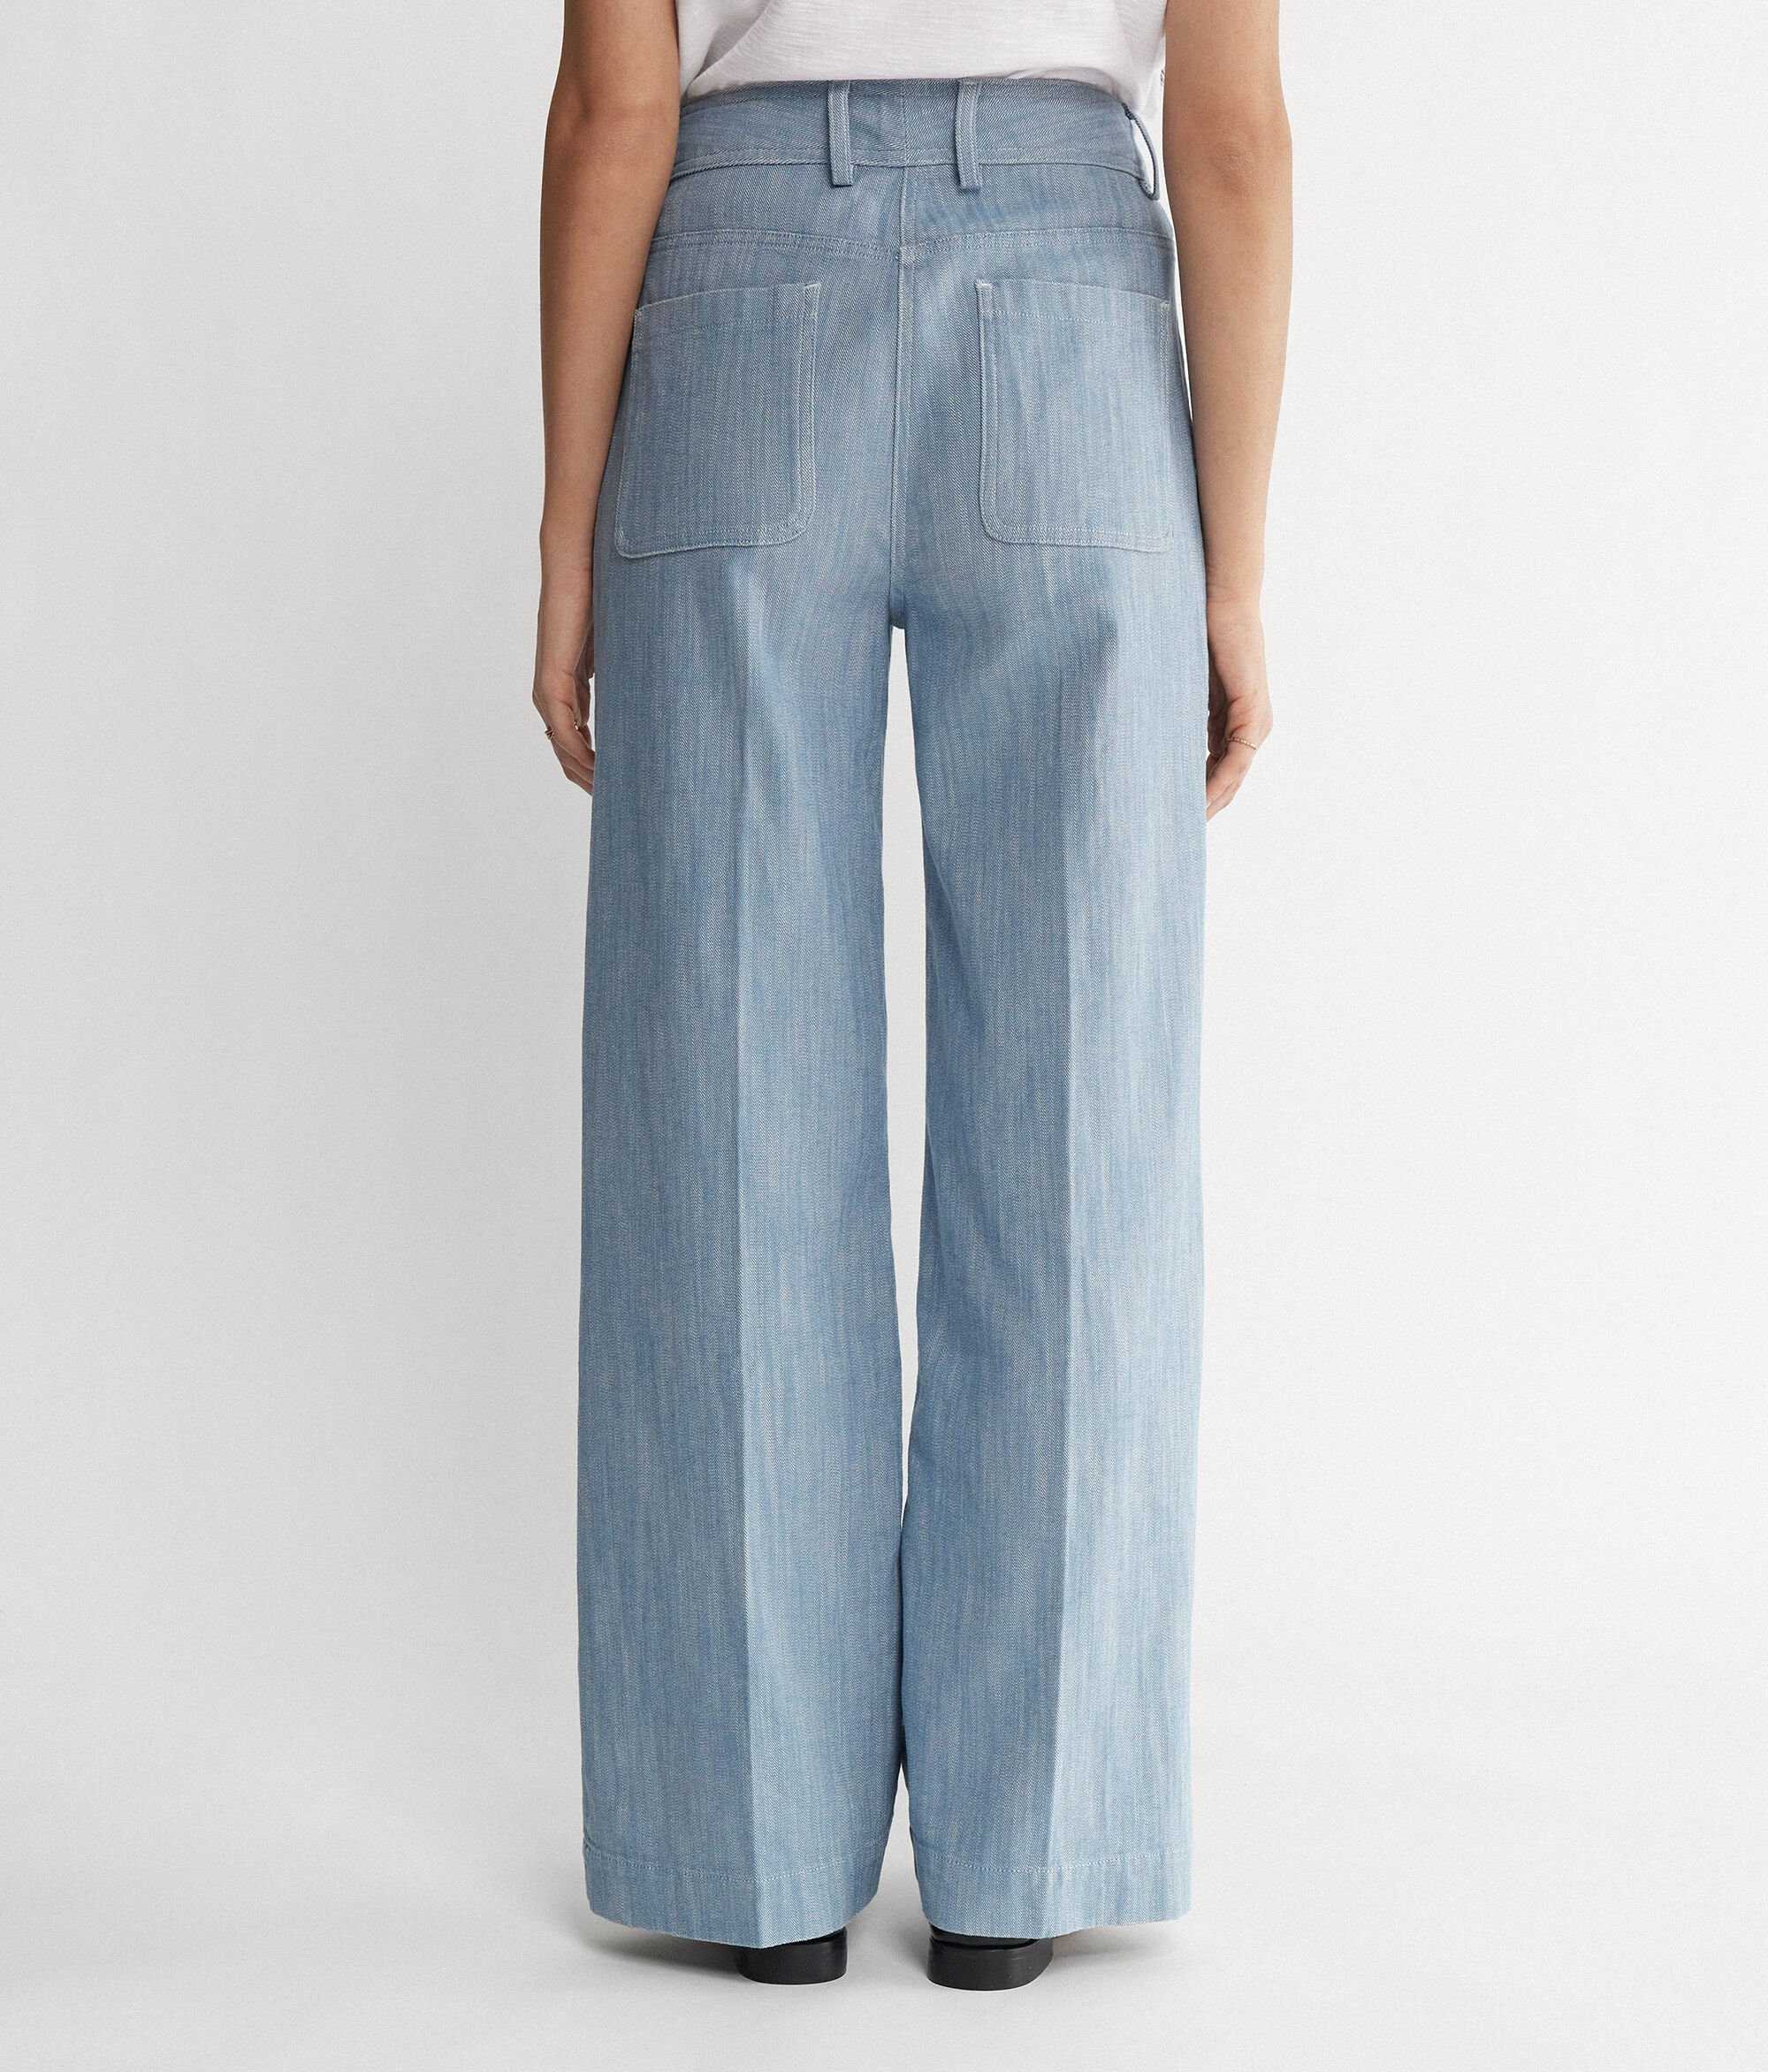 Denim Pants with Patch Pockets